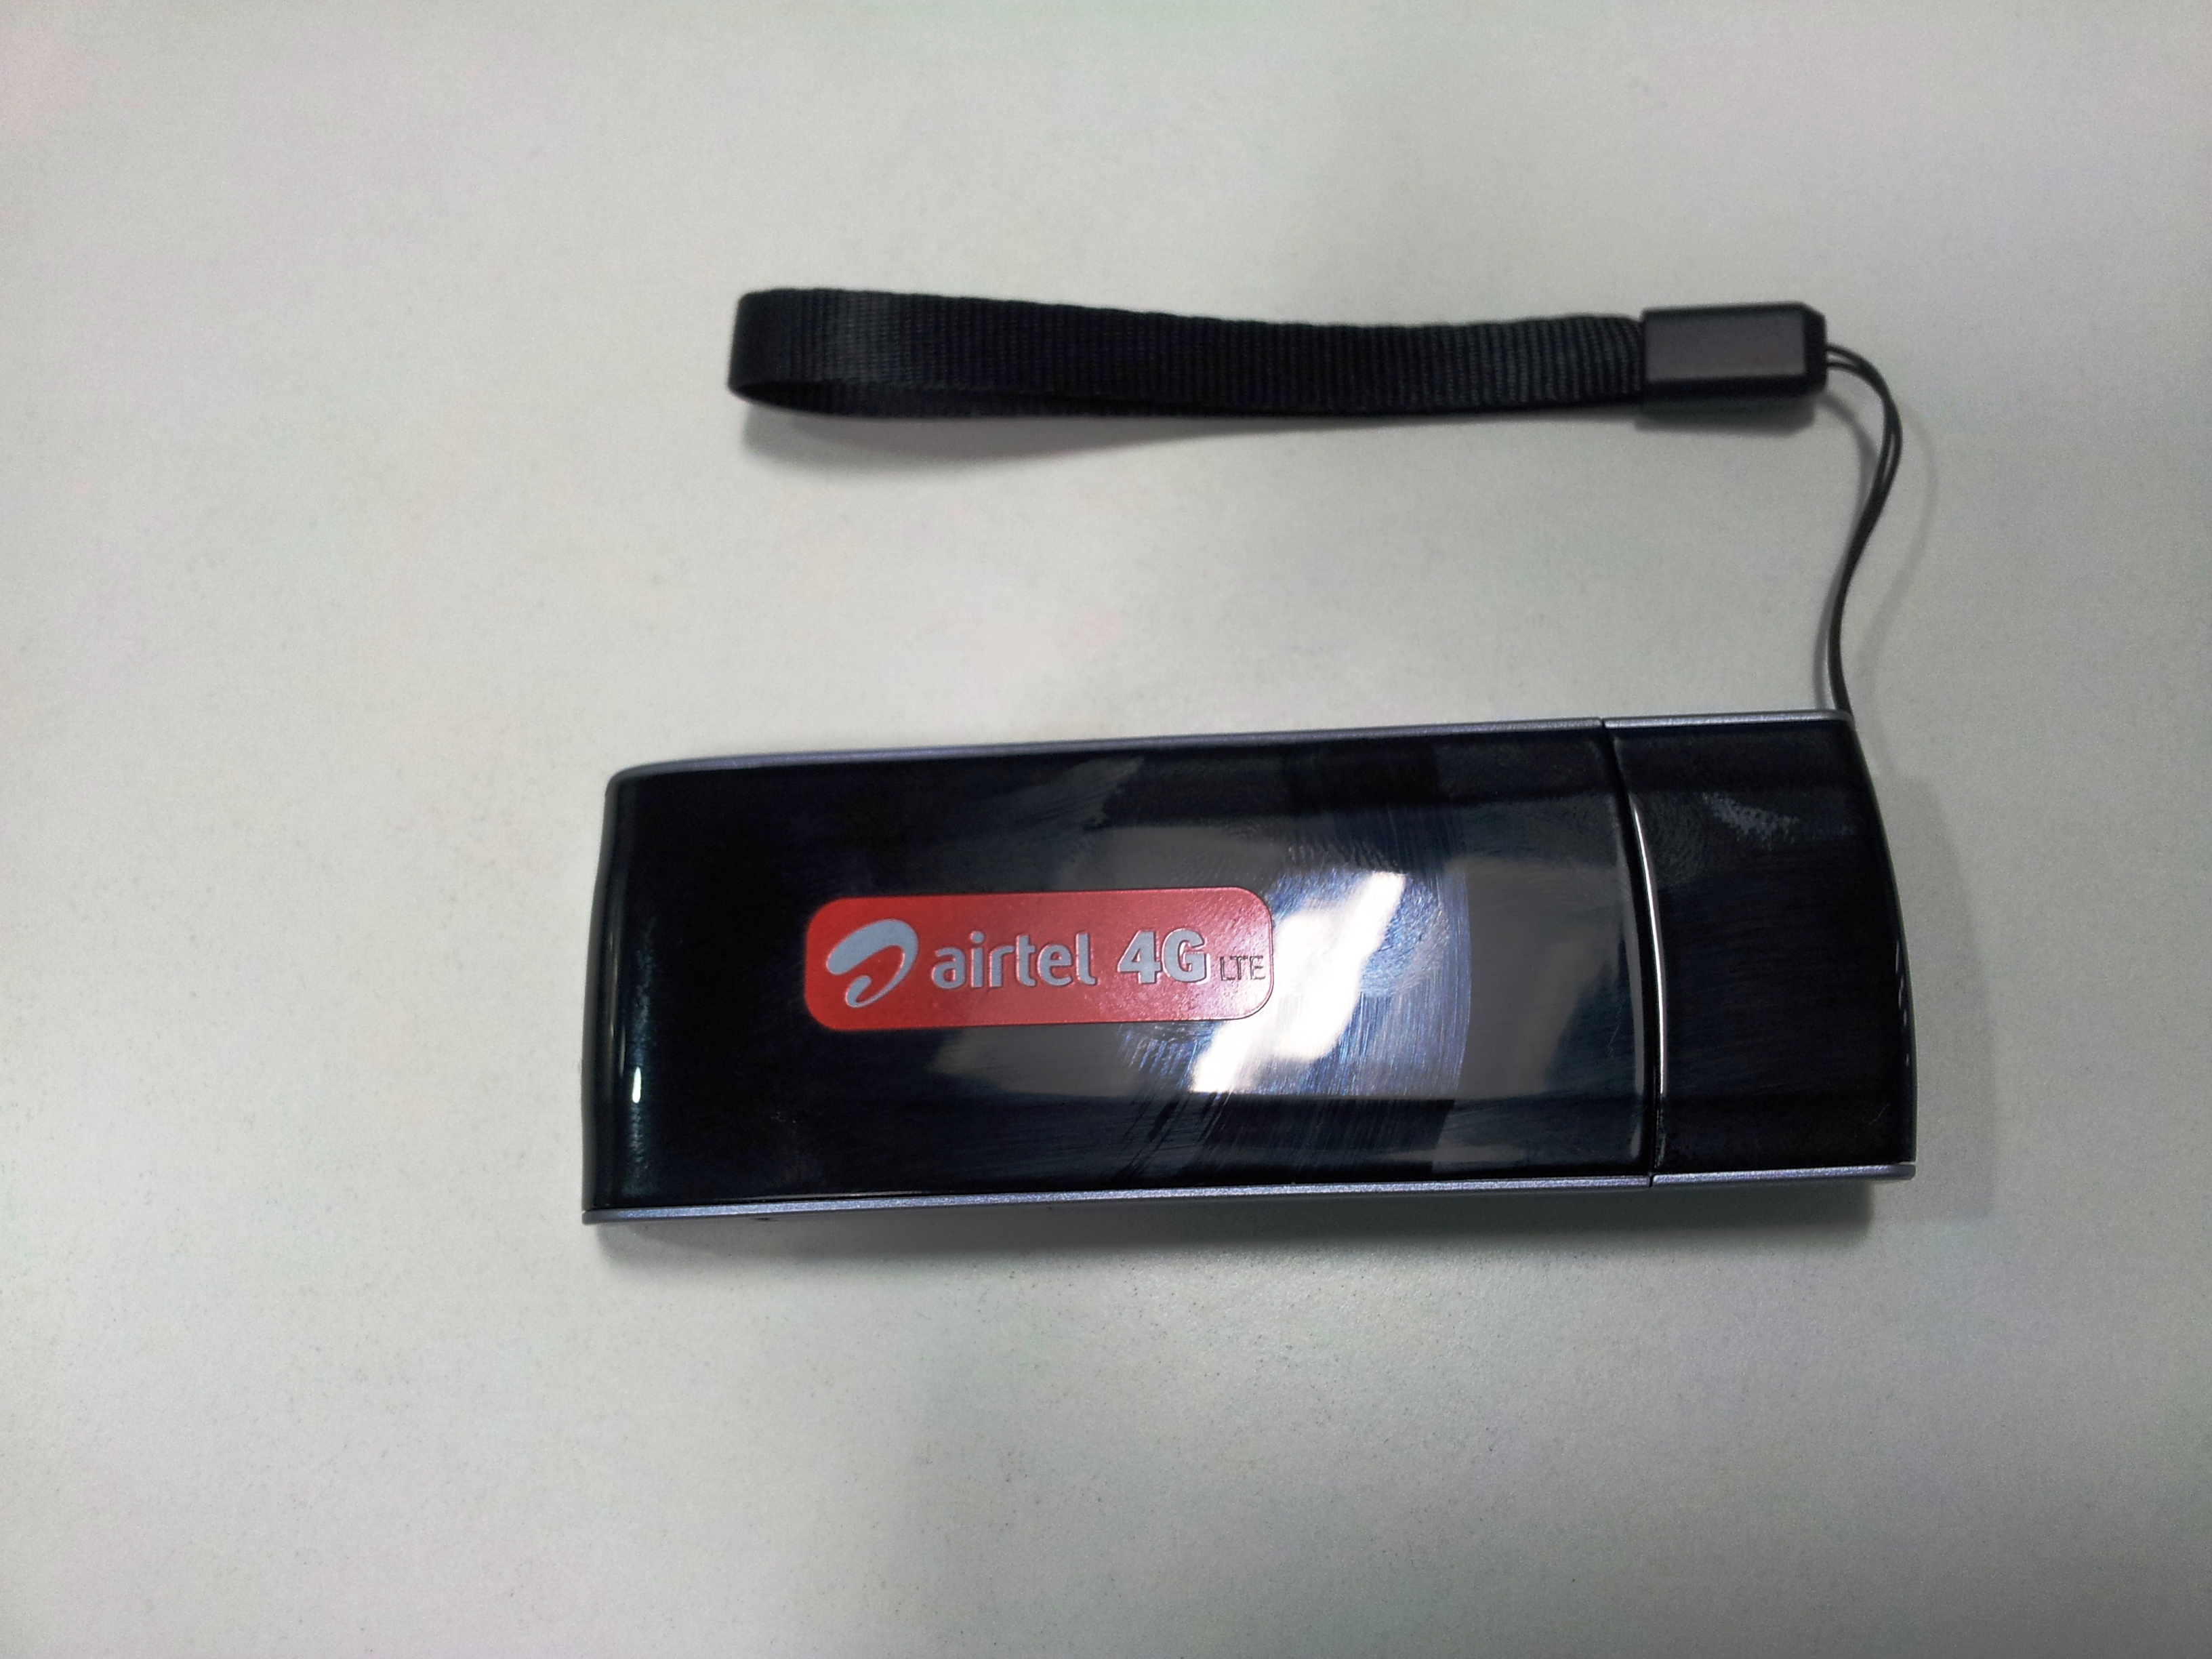 airtel 4g lte dongle software